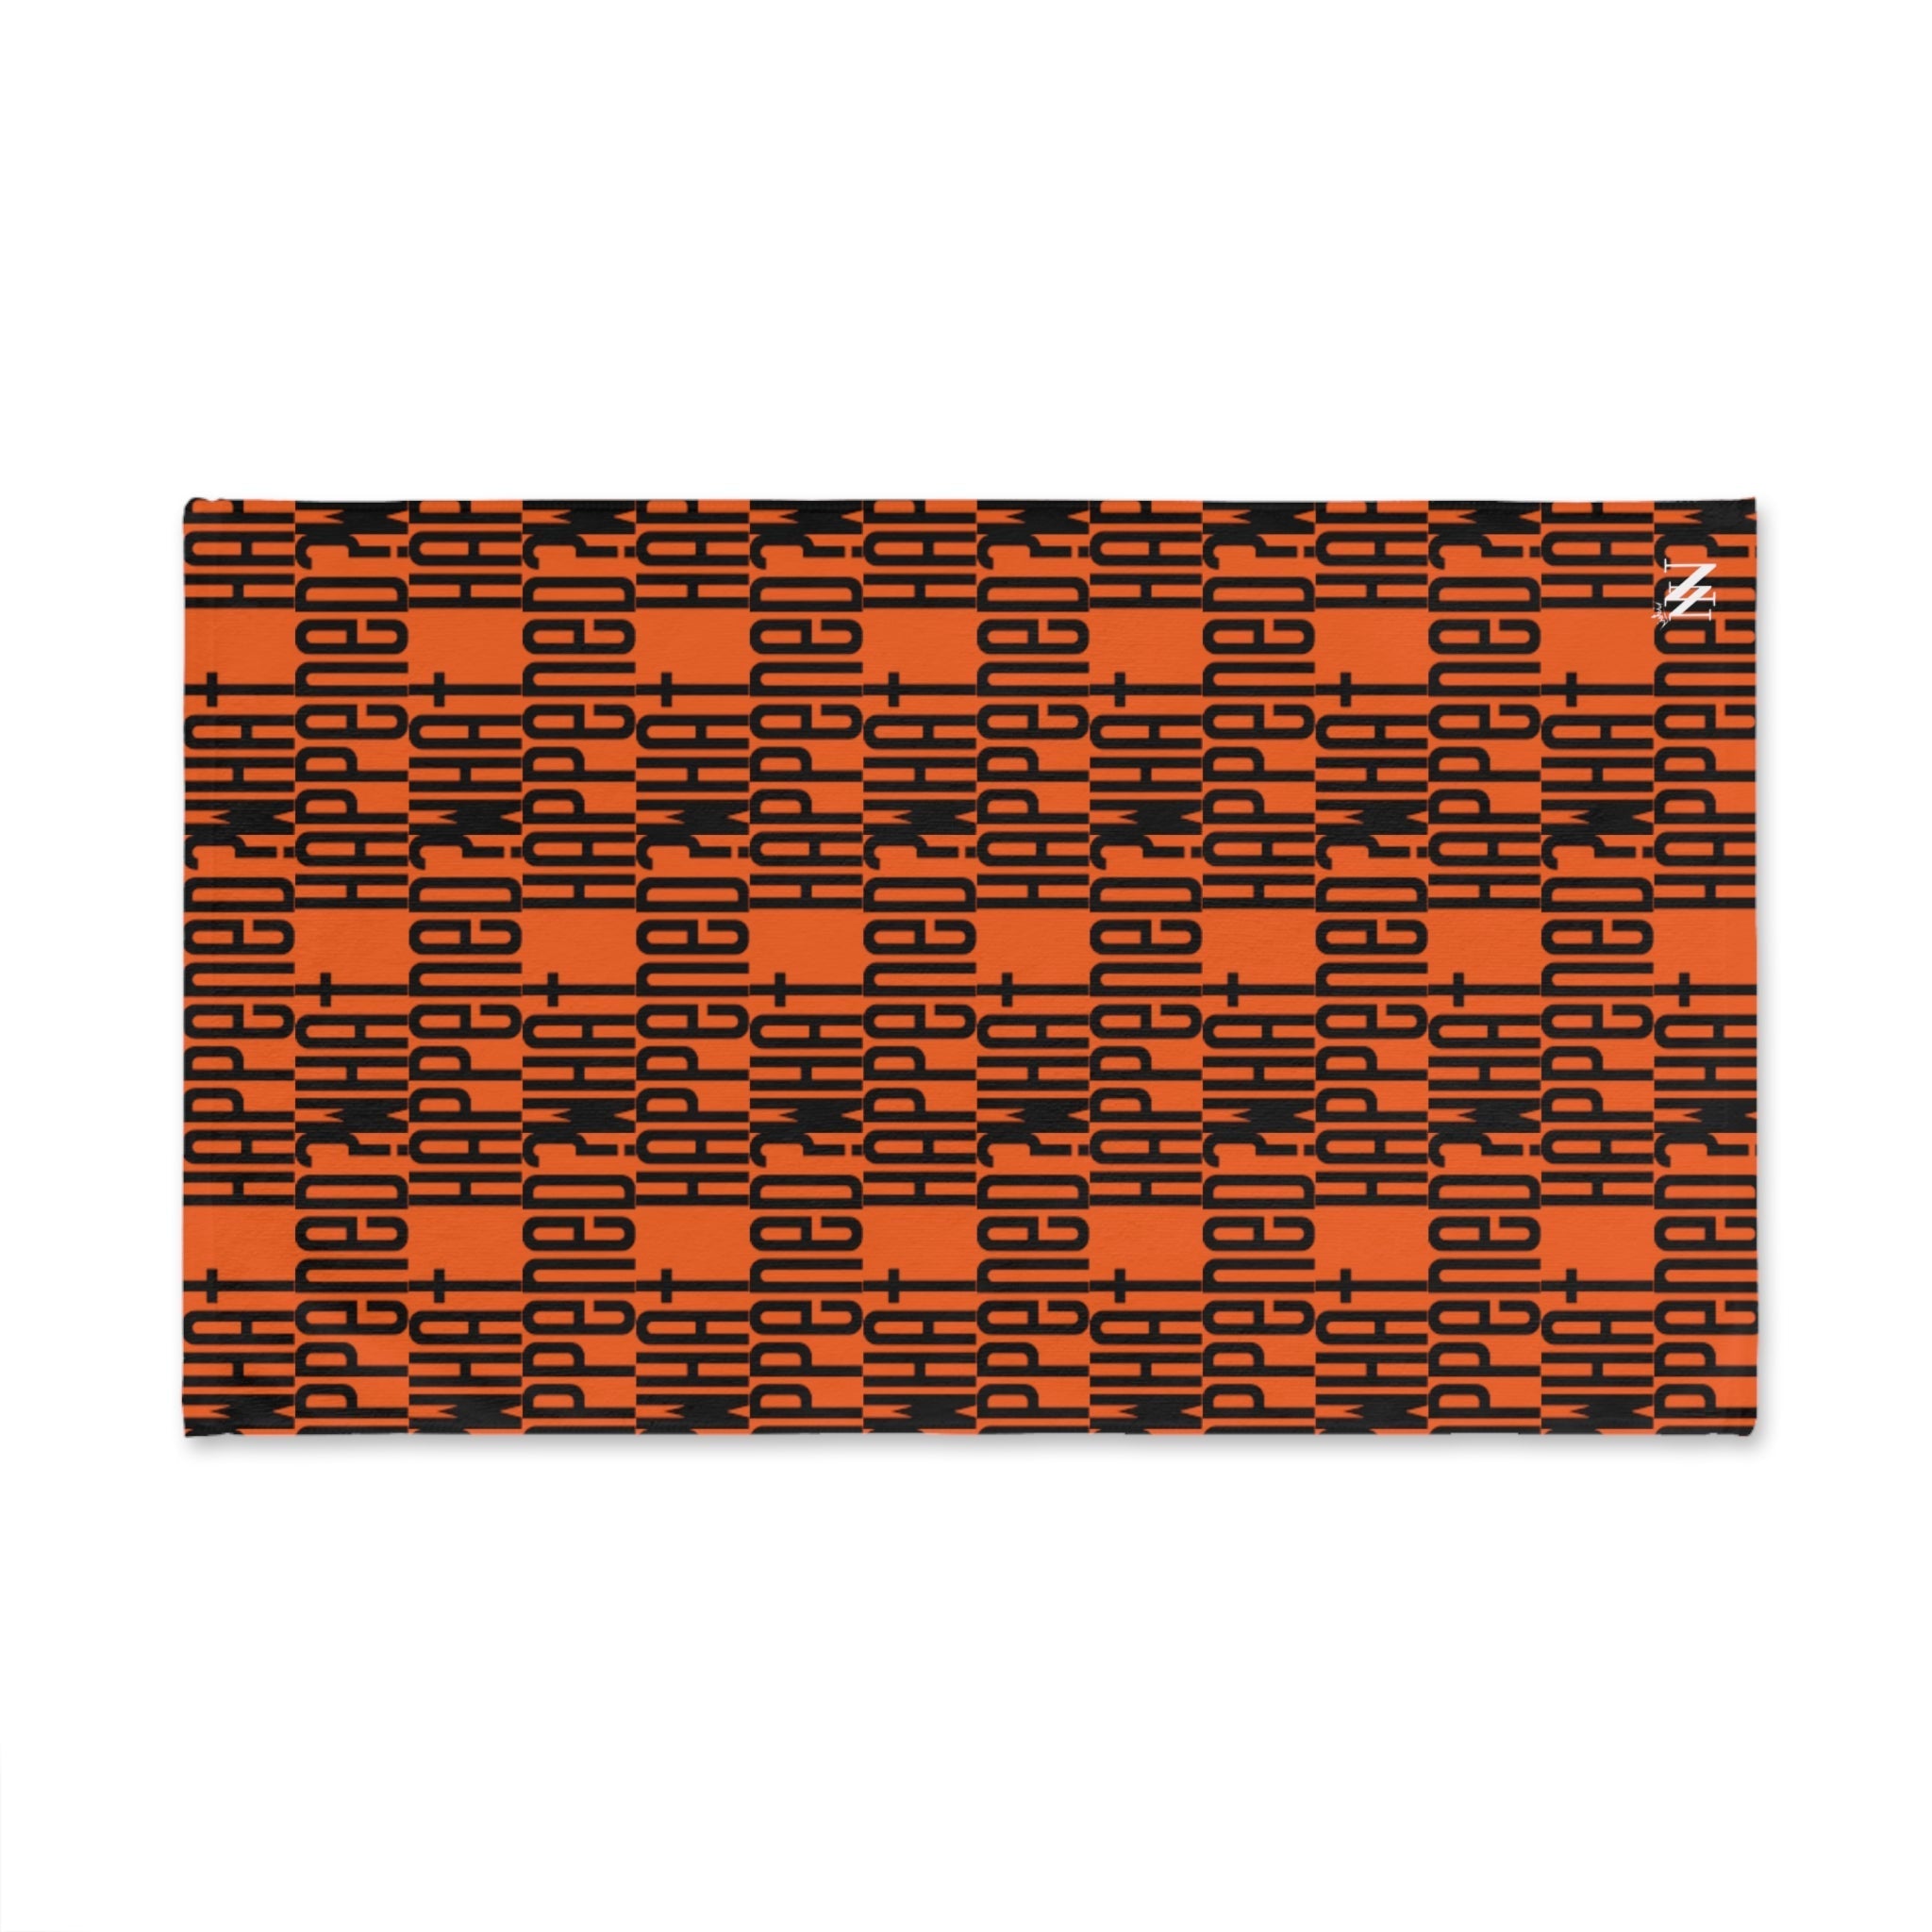 What Happen Pattern Orange | Funny Gifts for Men - Gifts for Him - Birthday Gifts for Men, Him, Husband, Boyfriend, New Couple Gifts, Fathers & Valentines Day Gifts, Hand Towels NECTAR NAPKINS